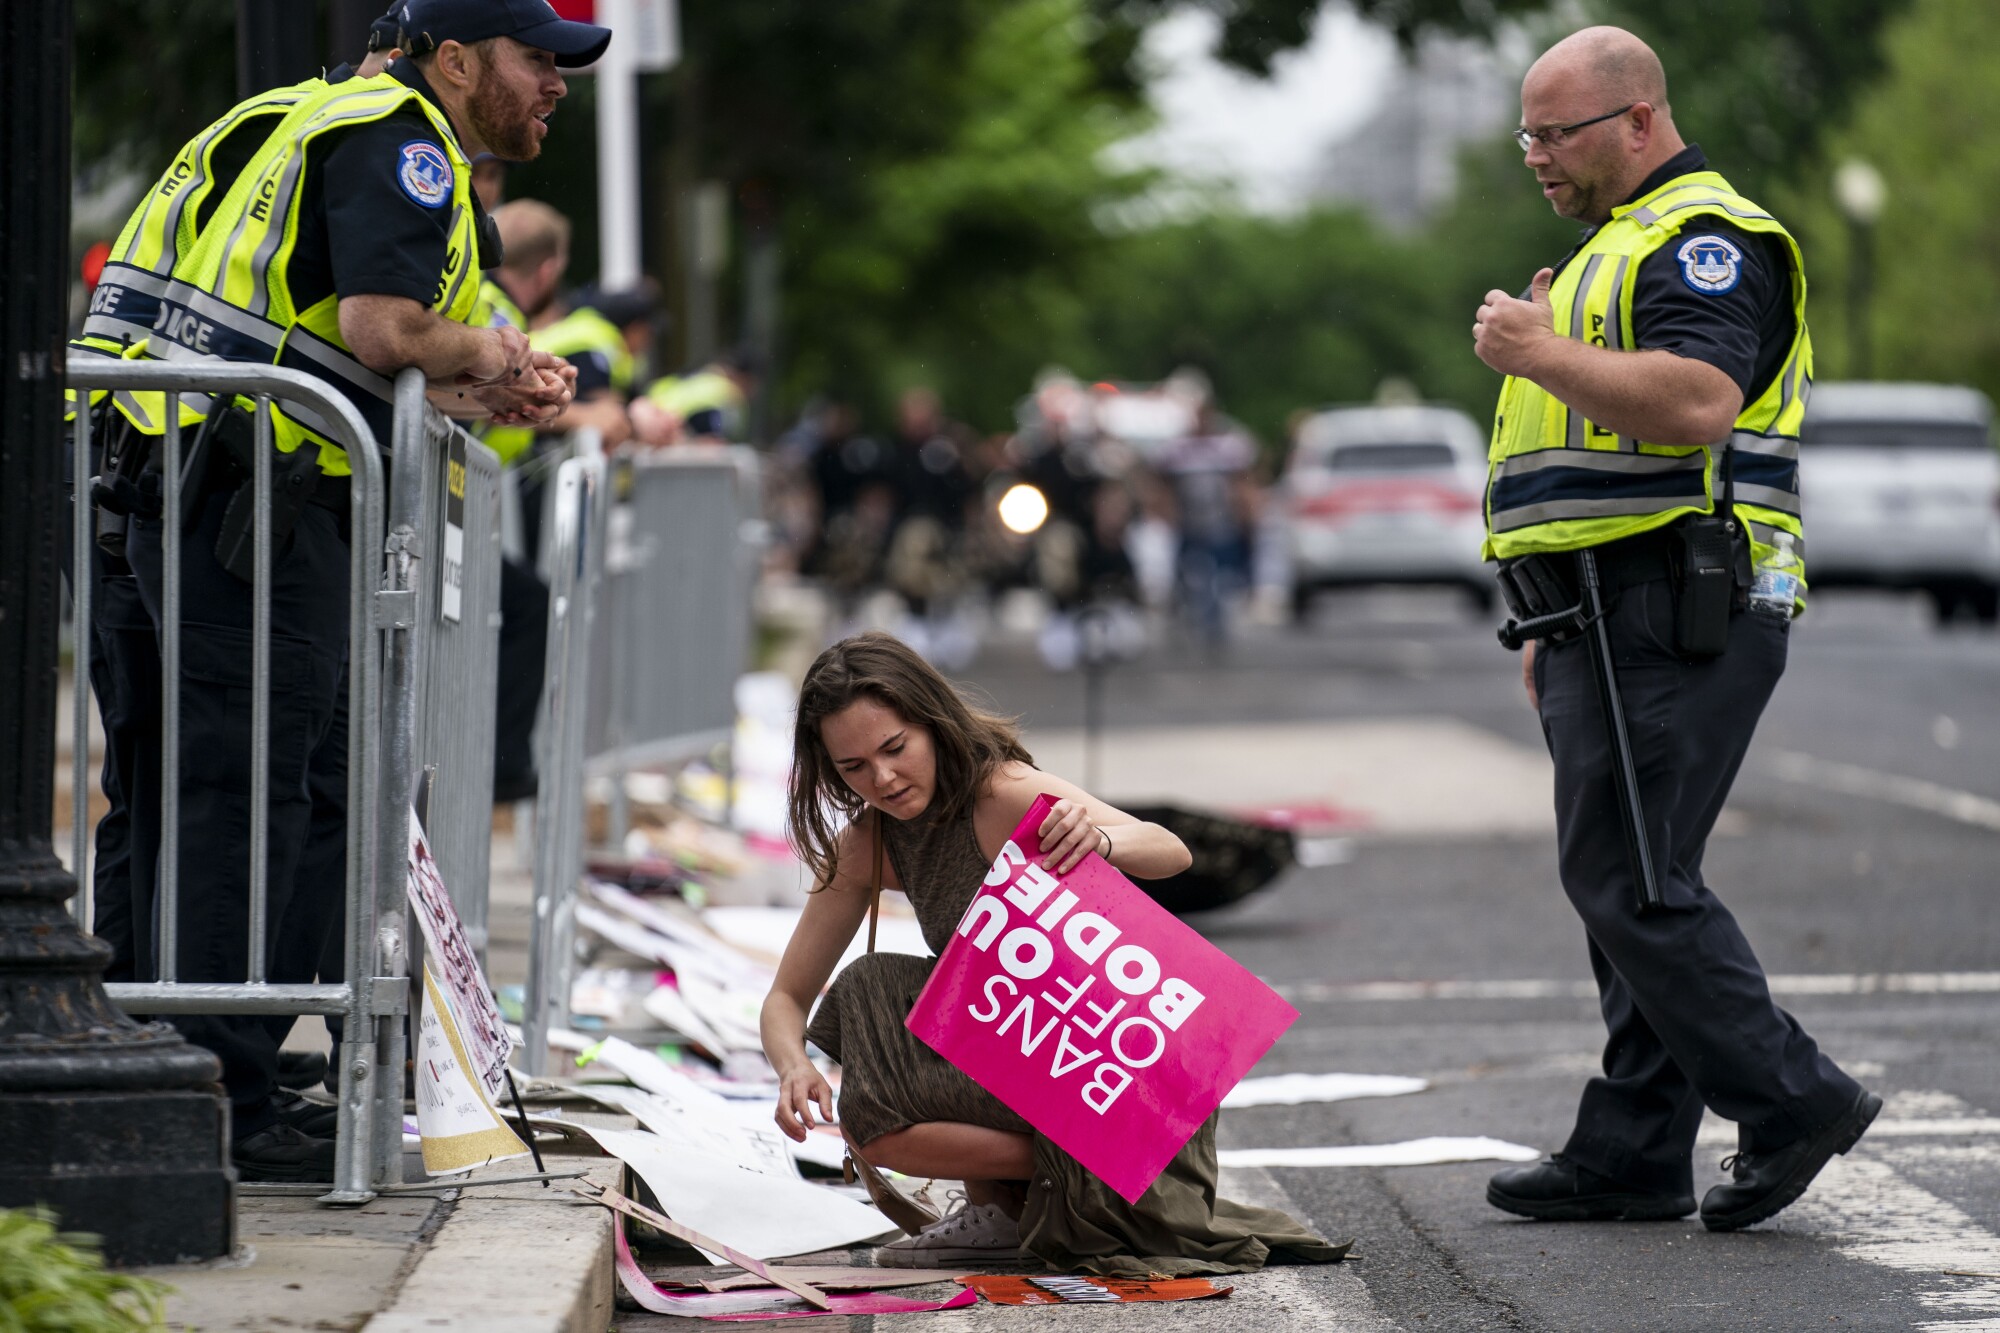   A demonstrator puts signs back up on the barricades after the signs were taken down by Capitol Police officers.